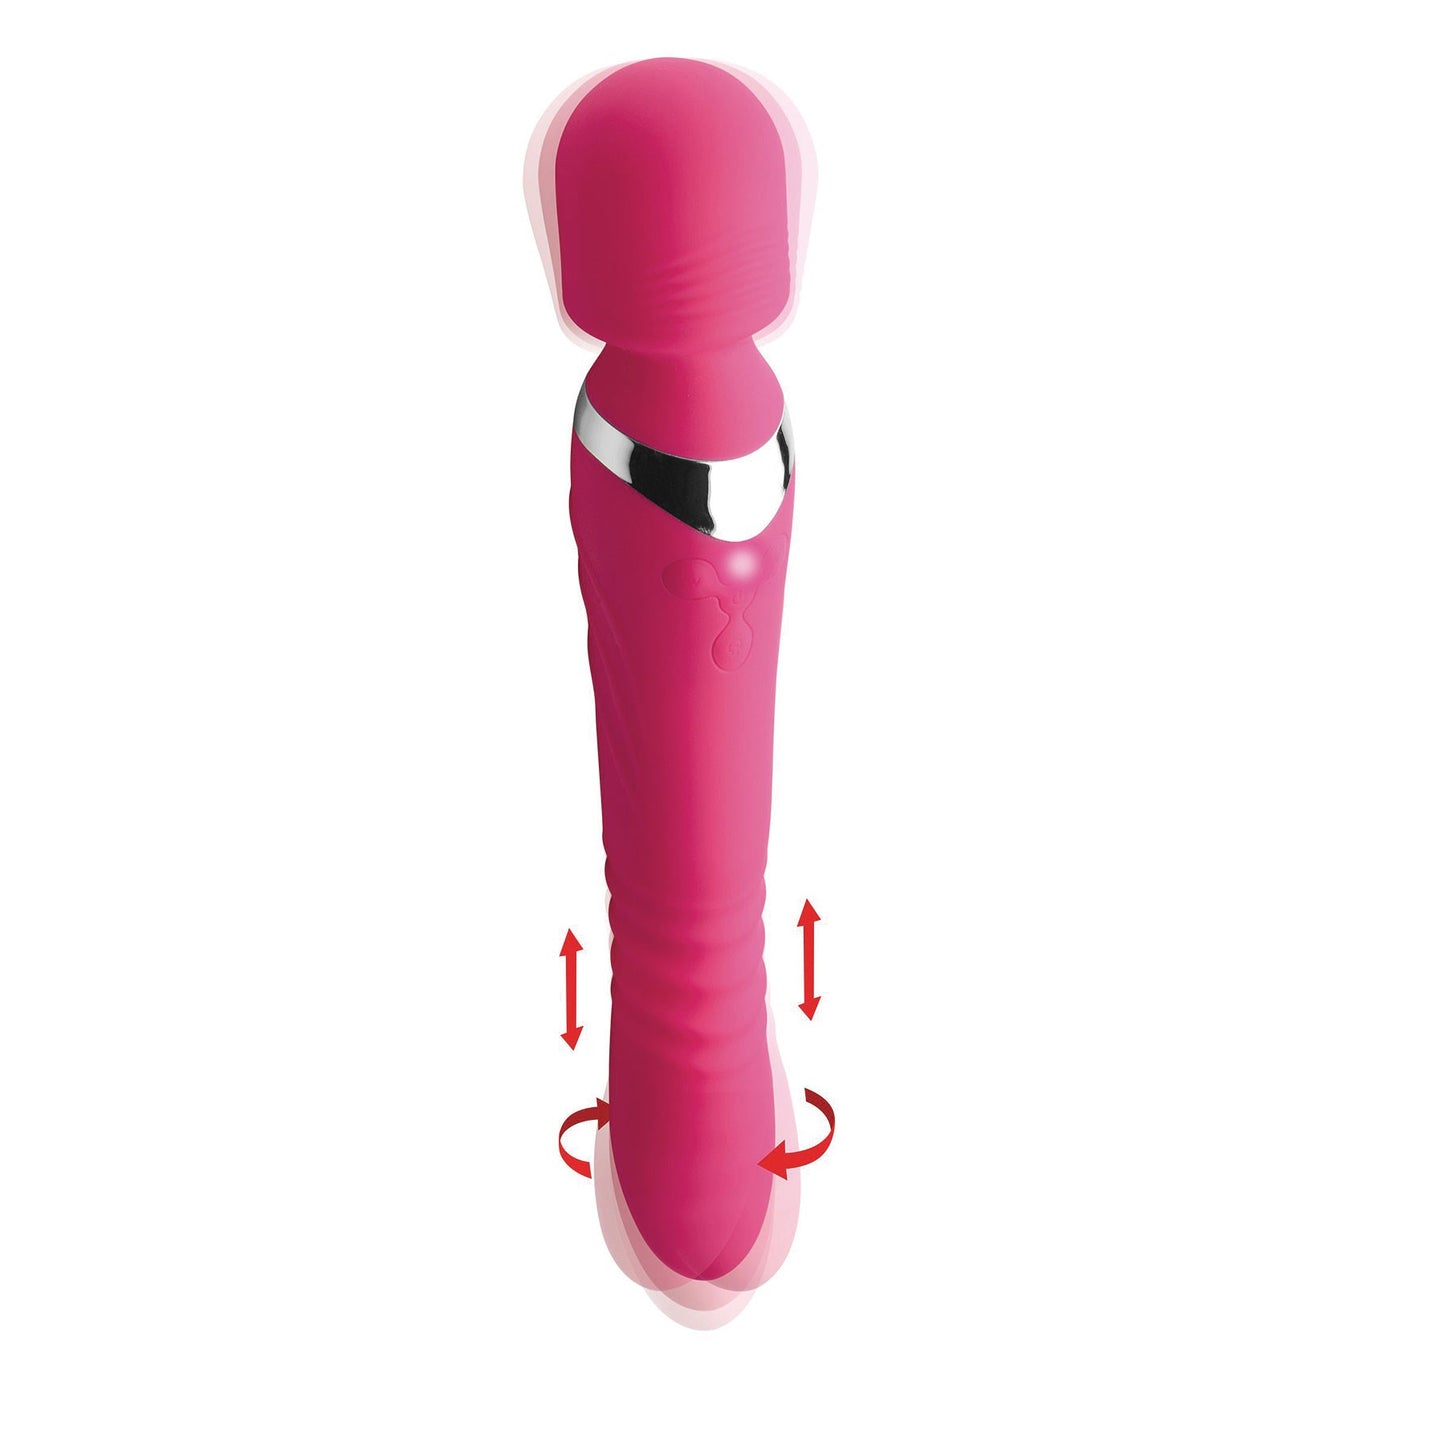 INMI Ultra Thrusting And Vibrating Silicone Wand